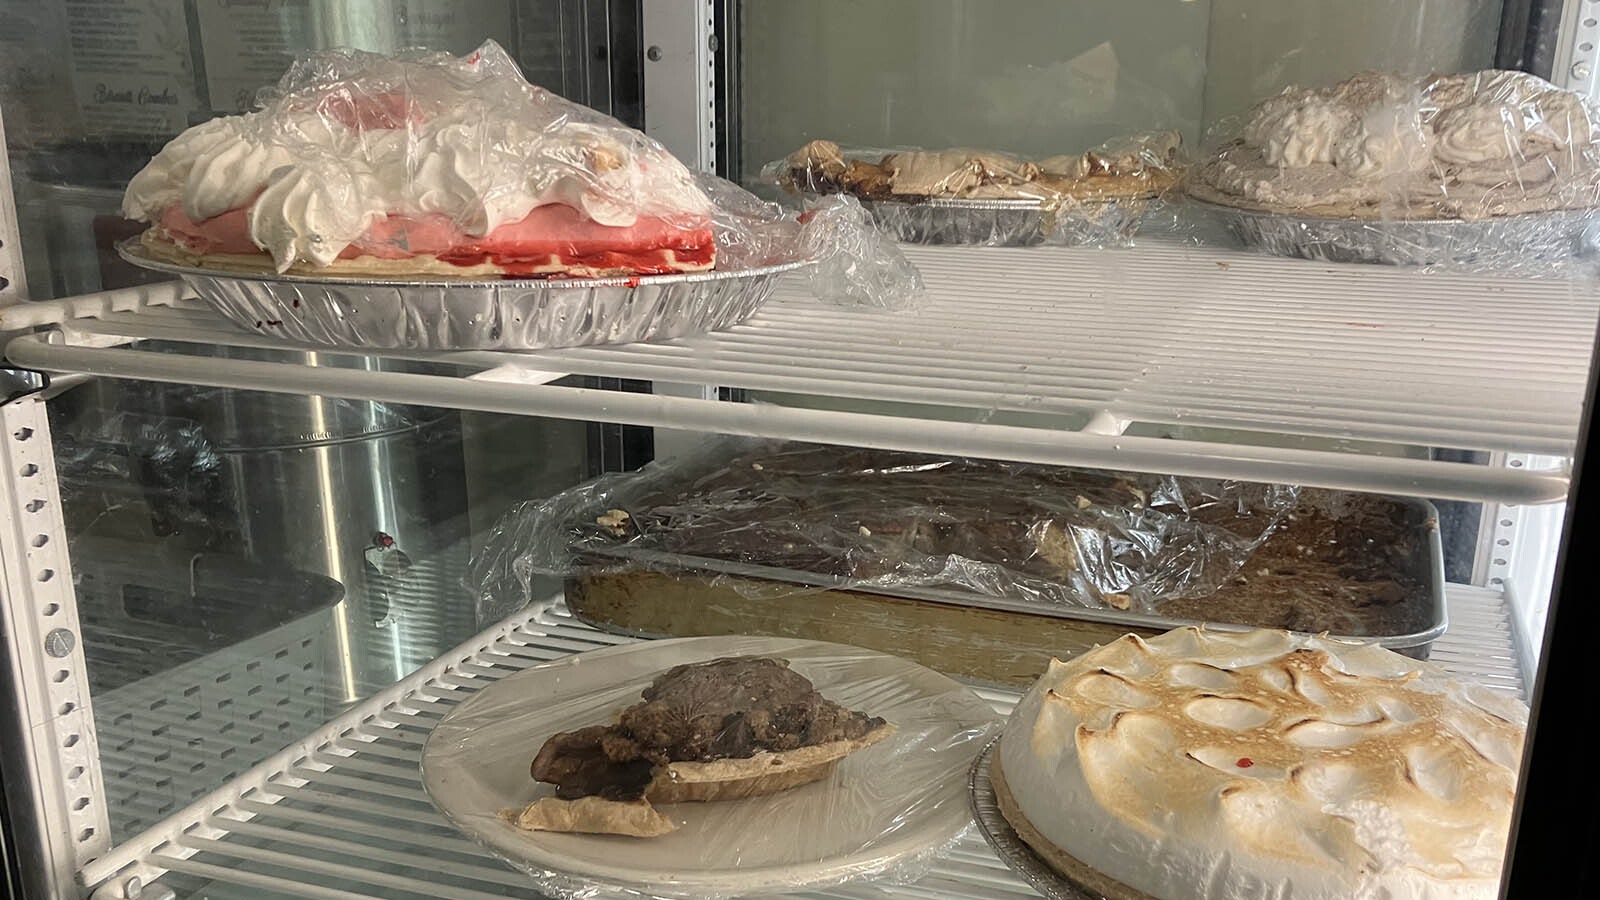 Homemade pies are part of the offerings at Sherrie’s Place in Casper.